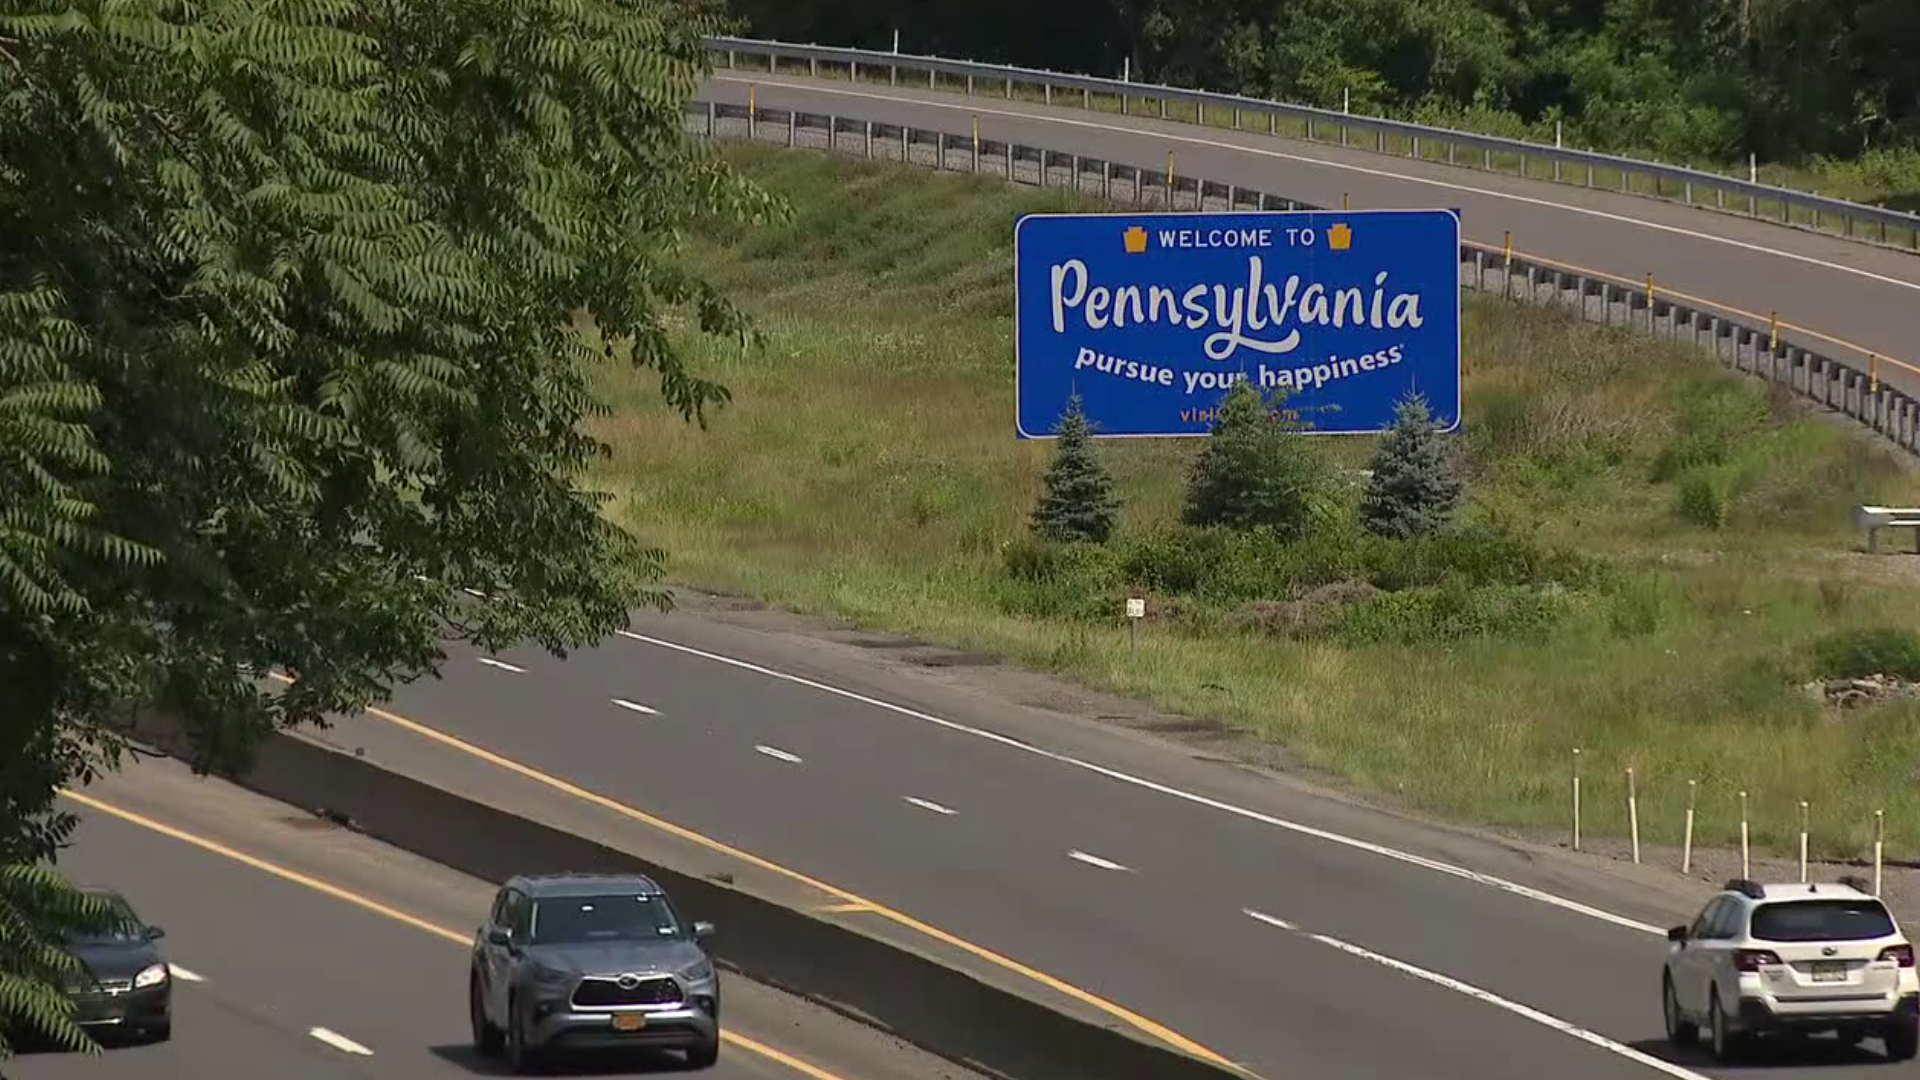 Over the past month, you may have noticed an increased amount of traffic in the Poconos. That's because more people are starting to travel.